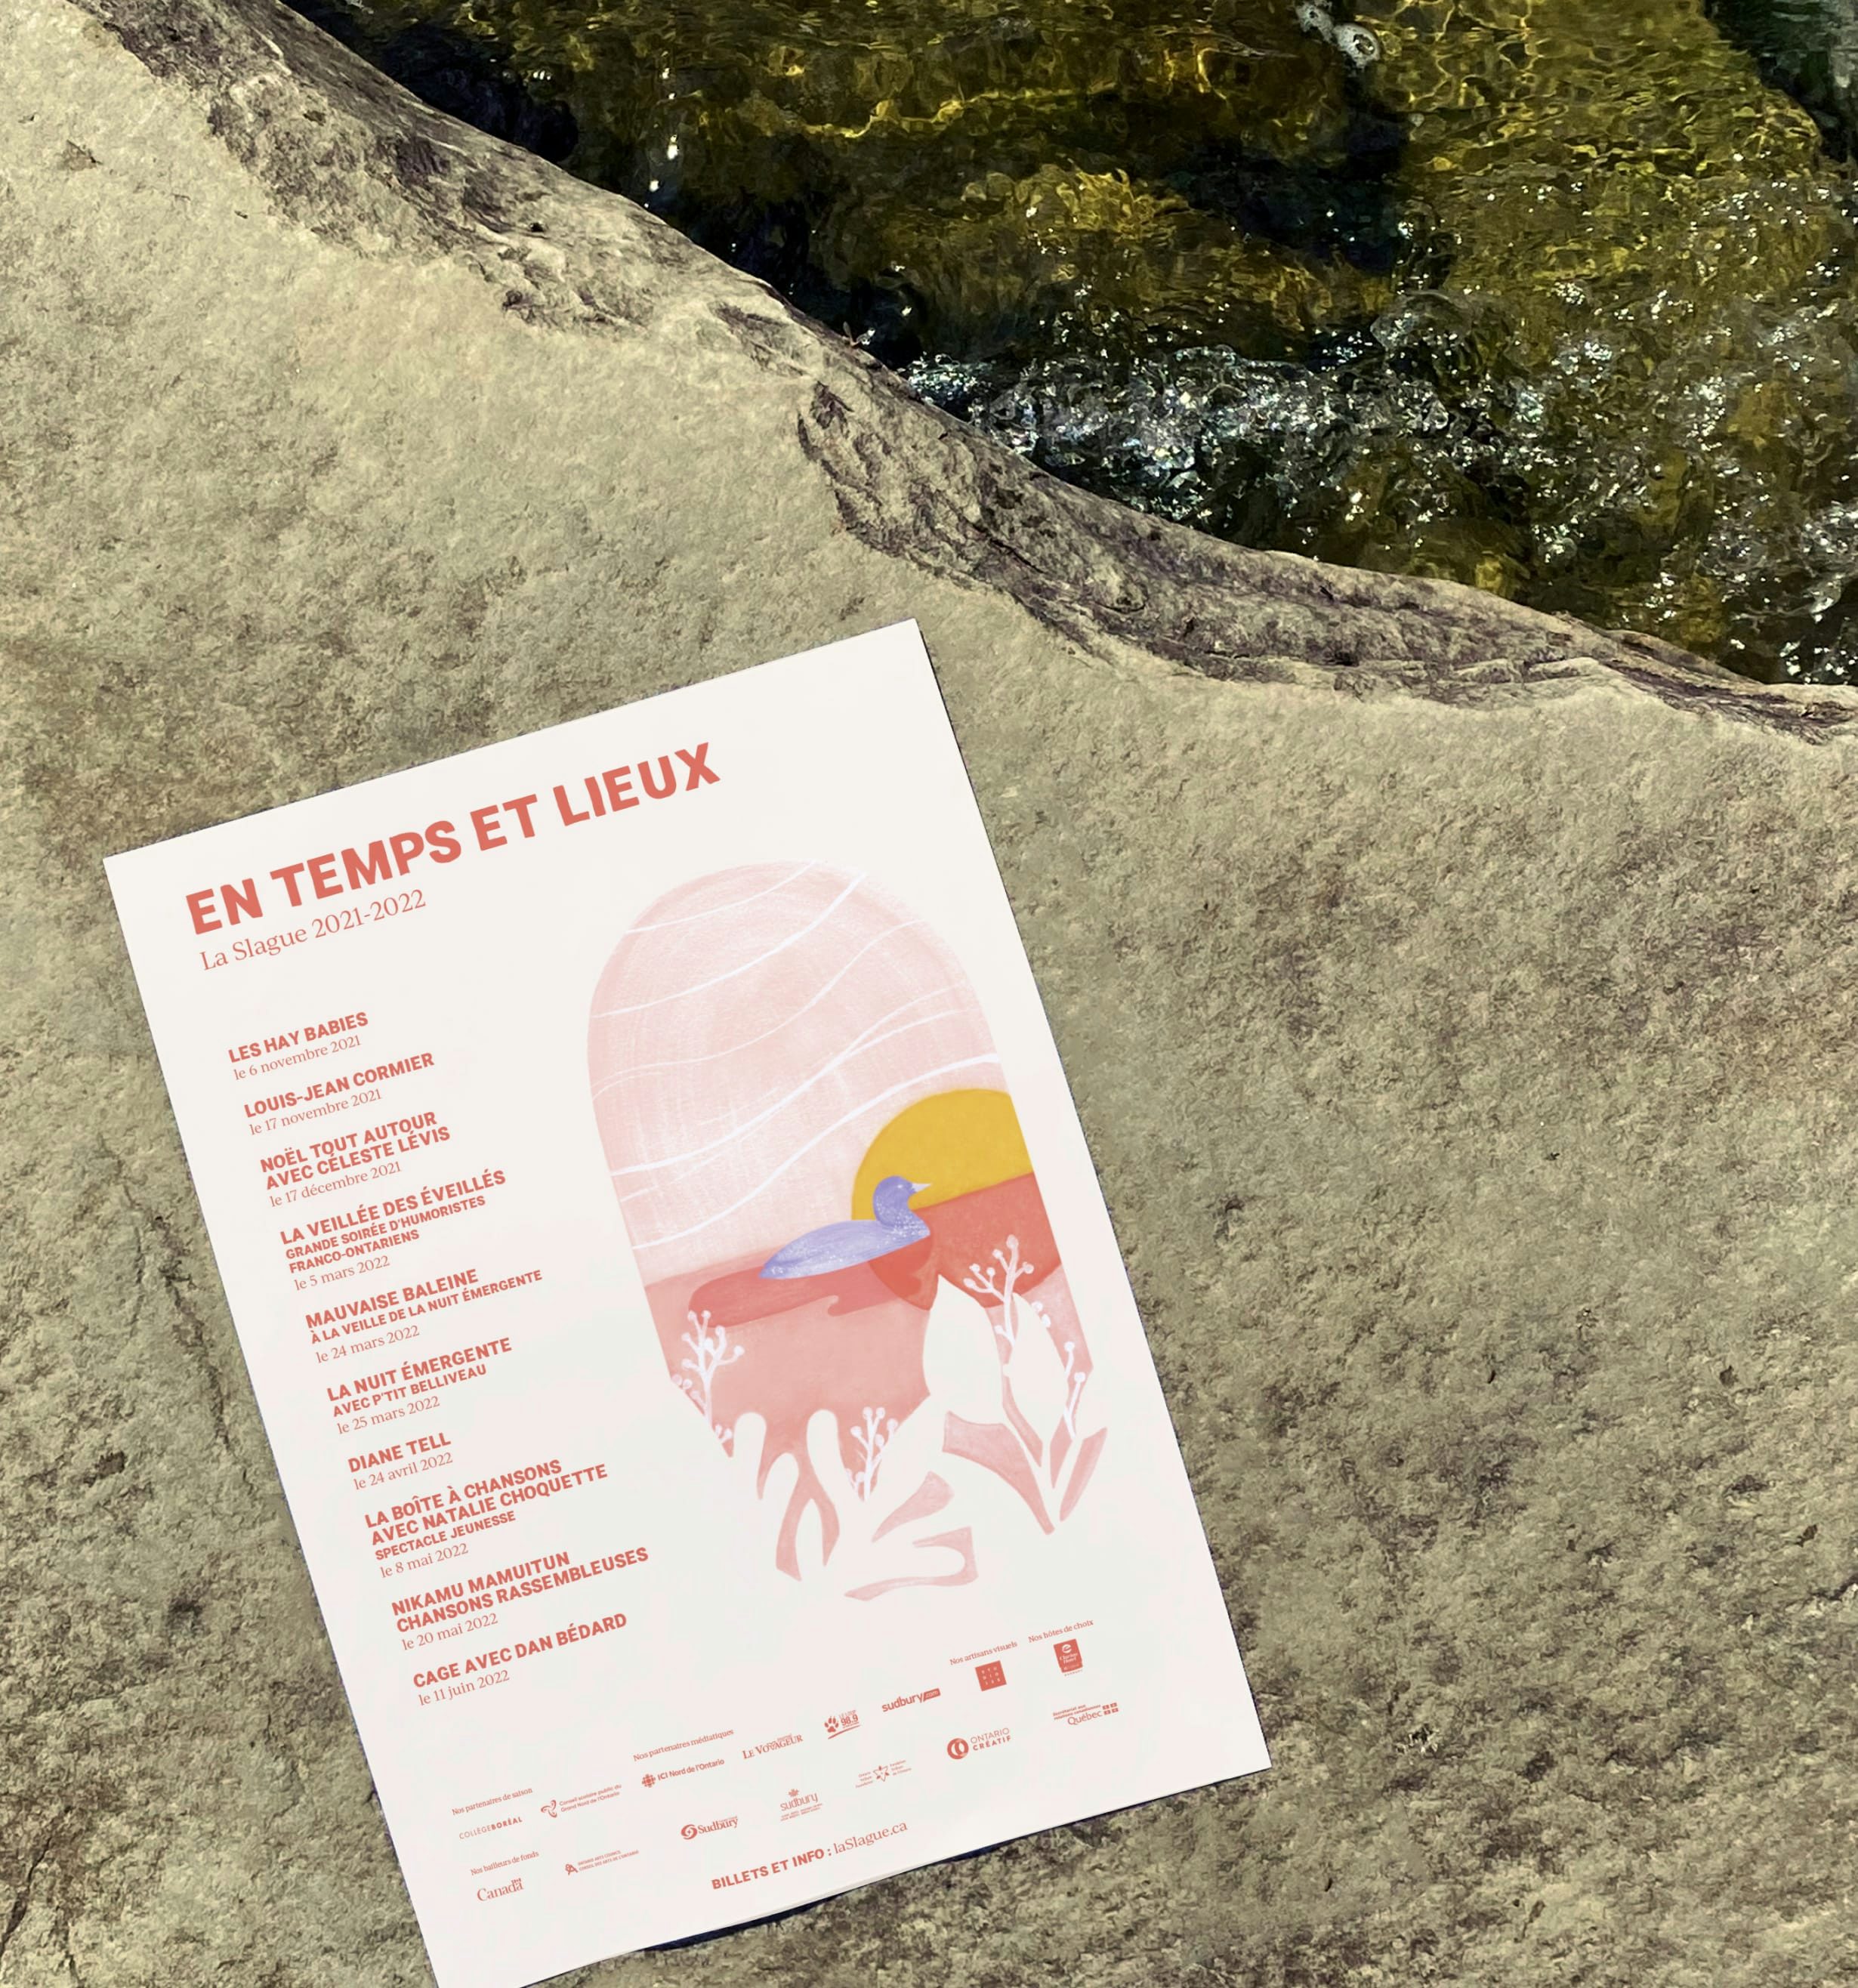 Branded poster for La Slague's 2021-2022 season placed on a rock